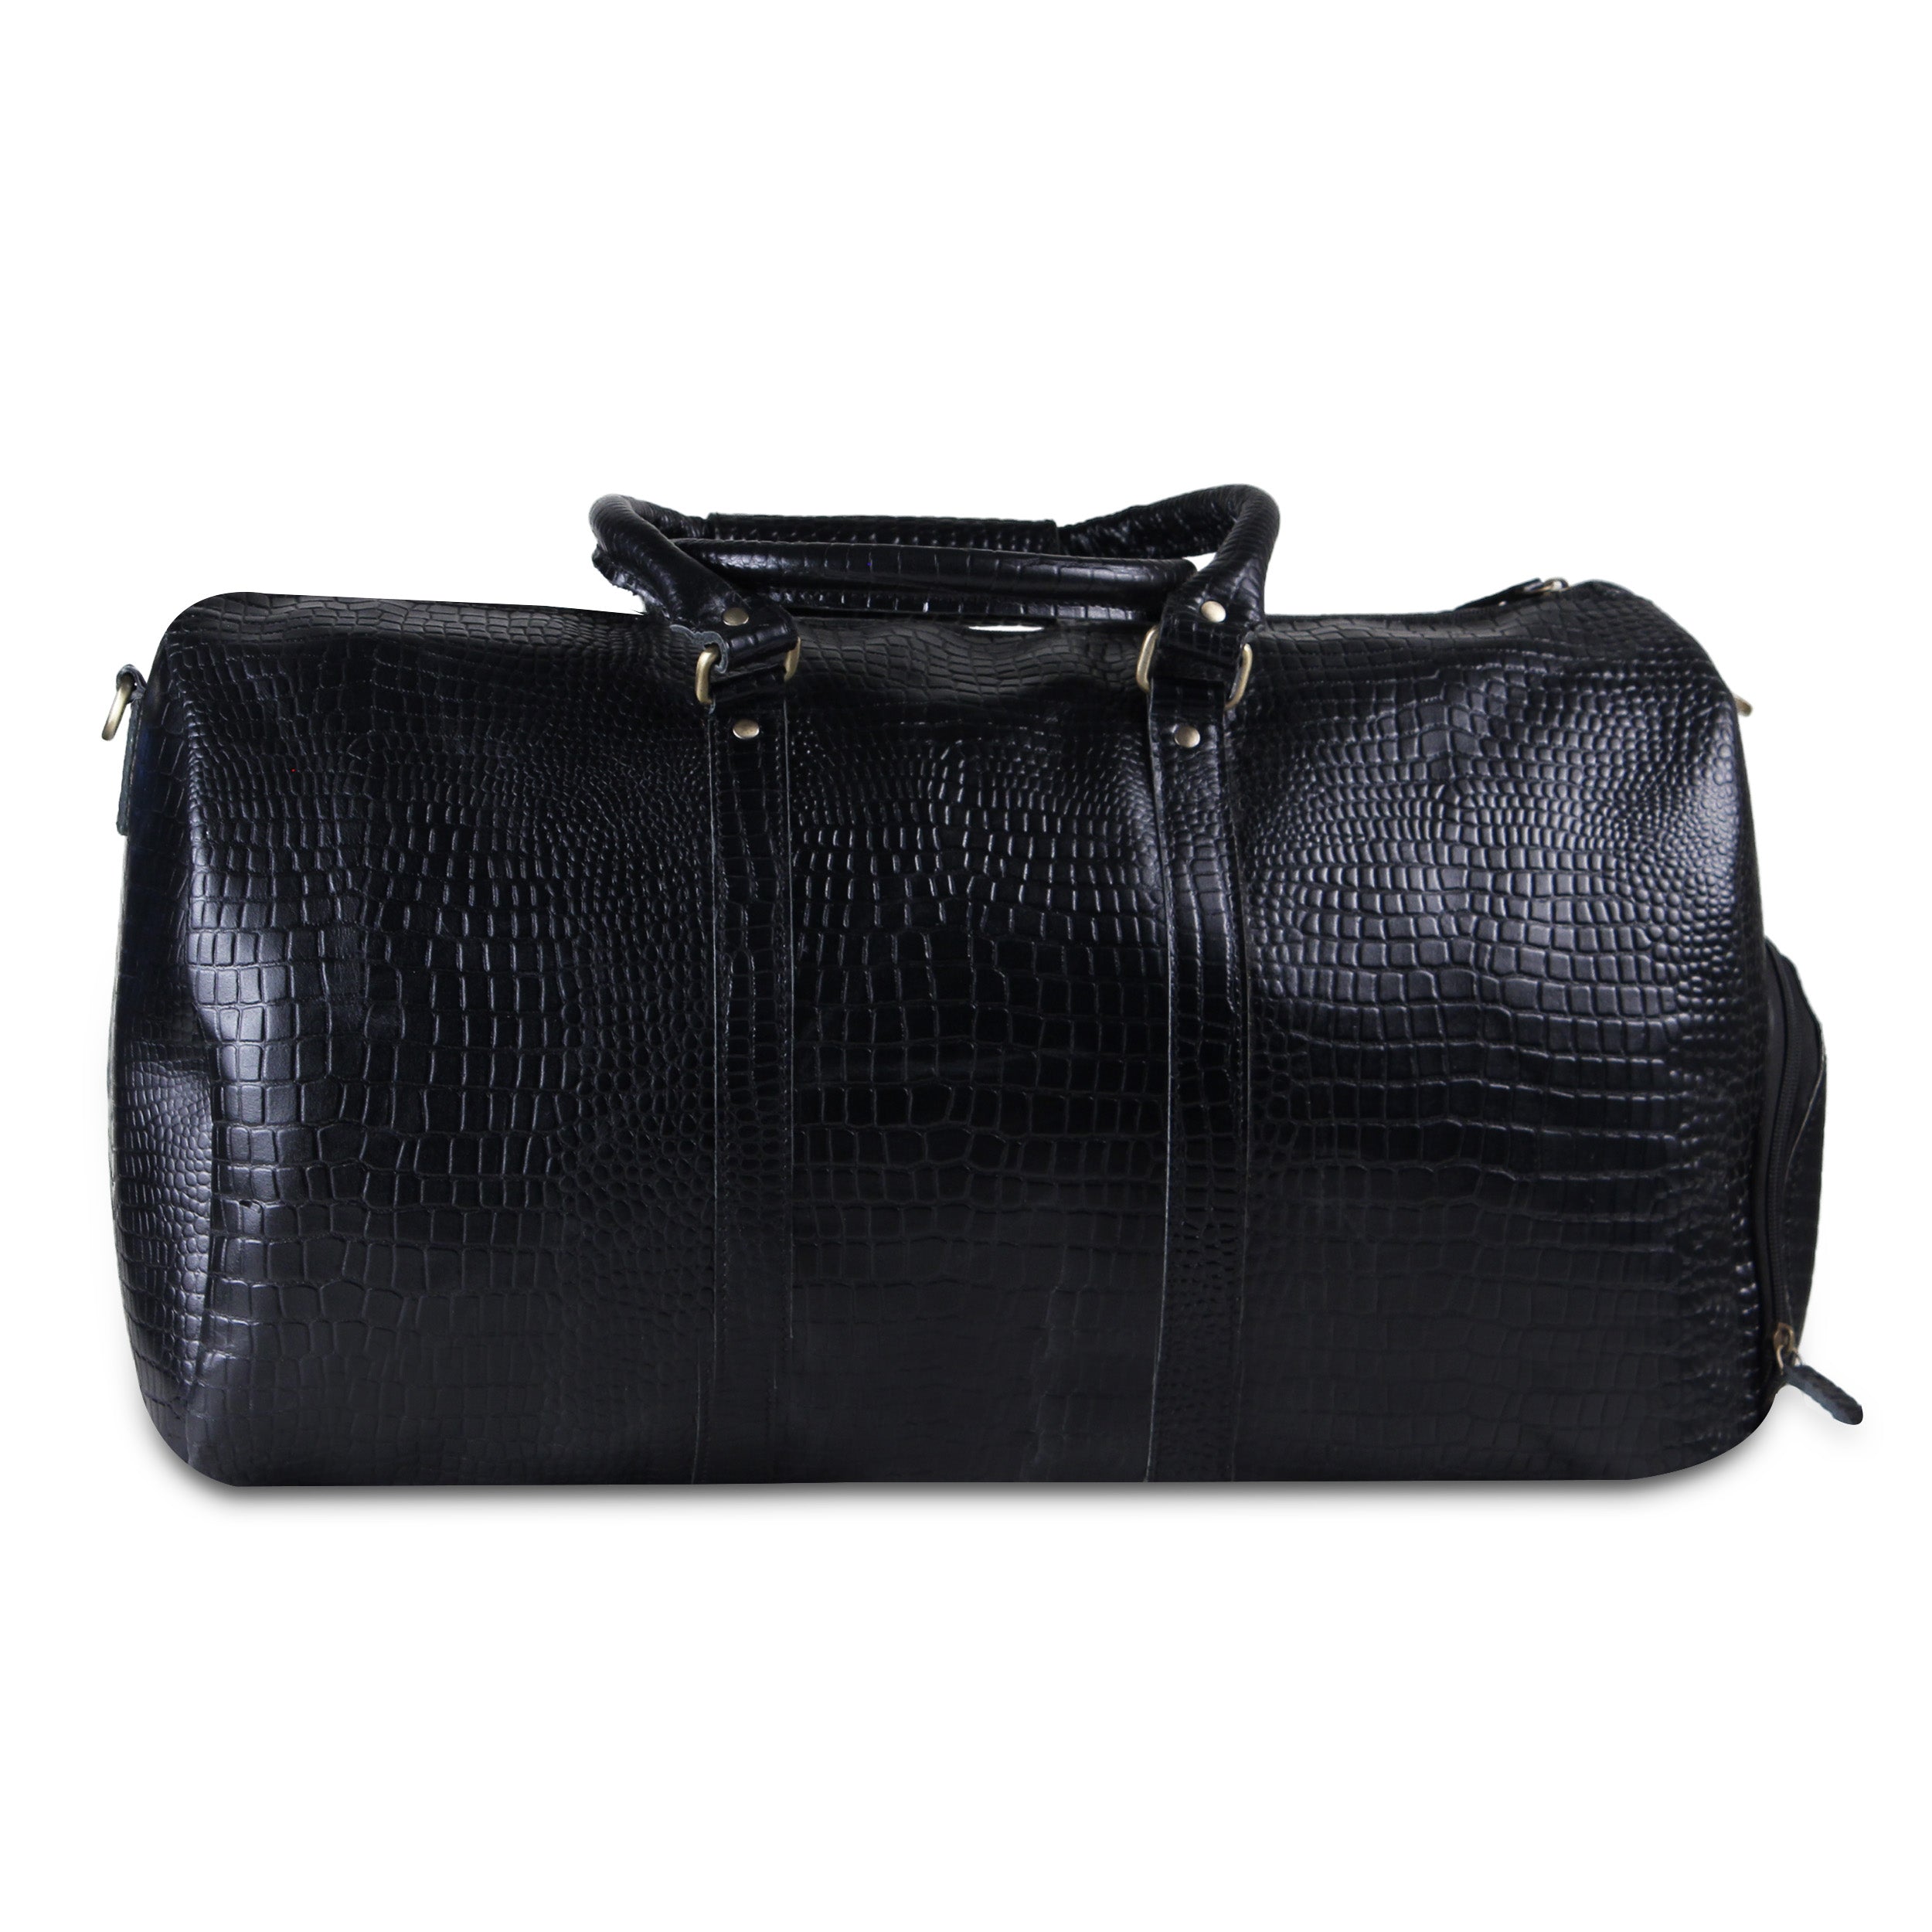 Genuine Black Leather Weekender Duffle Bag with High Quality Zippers